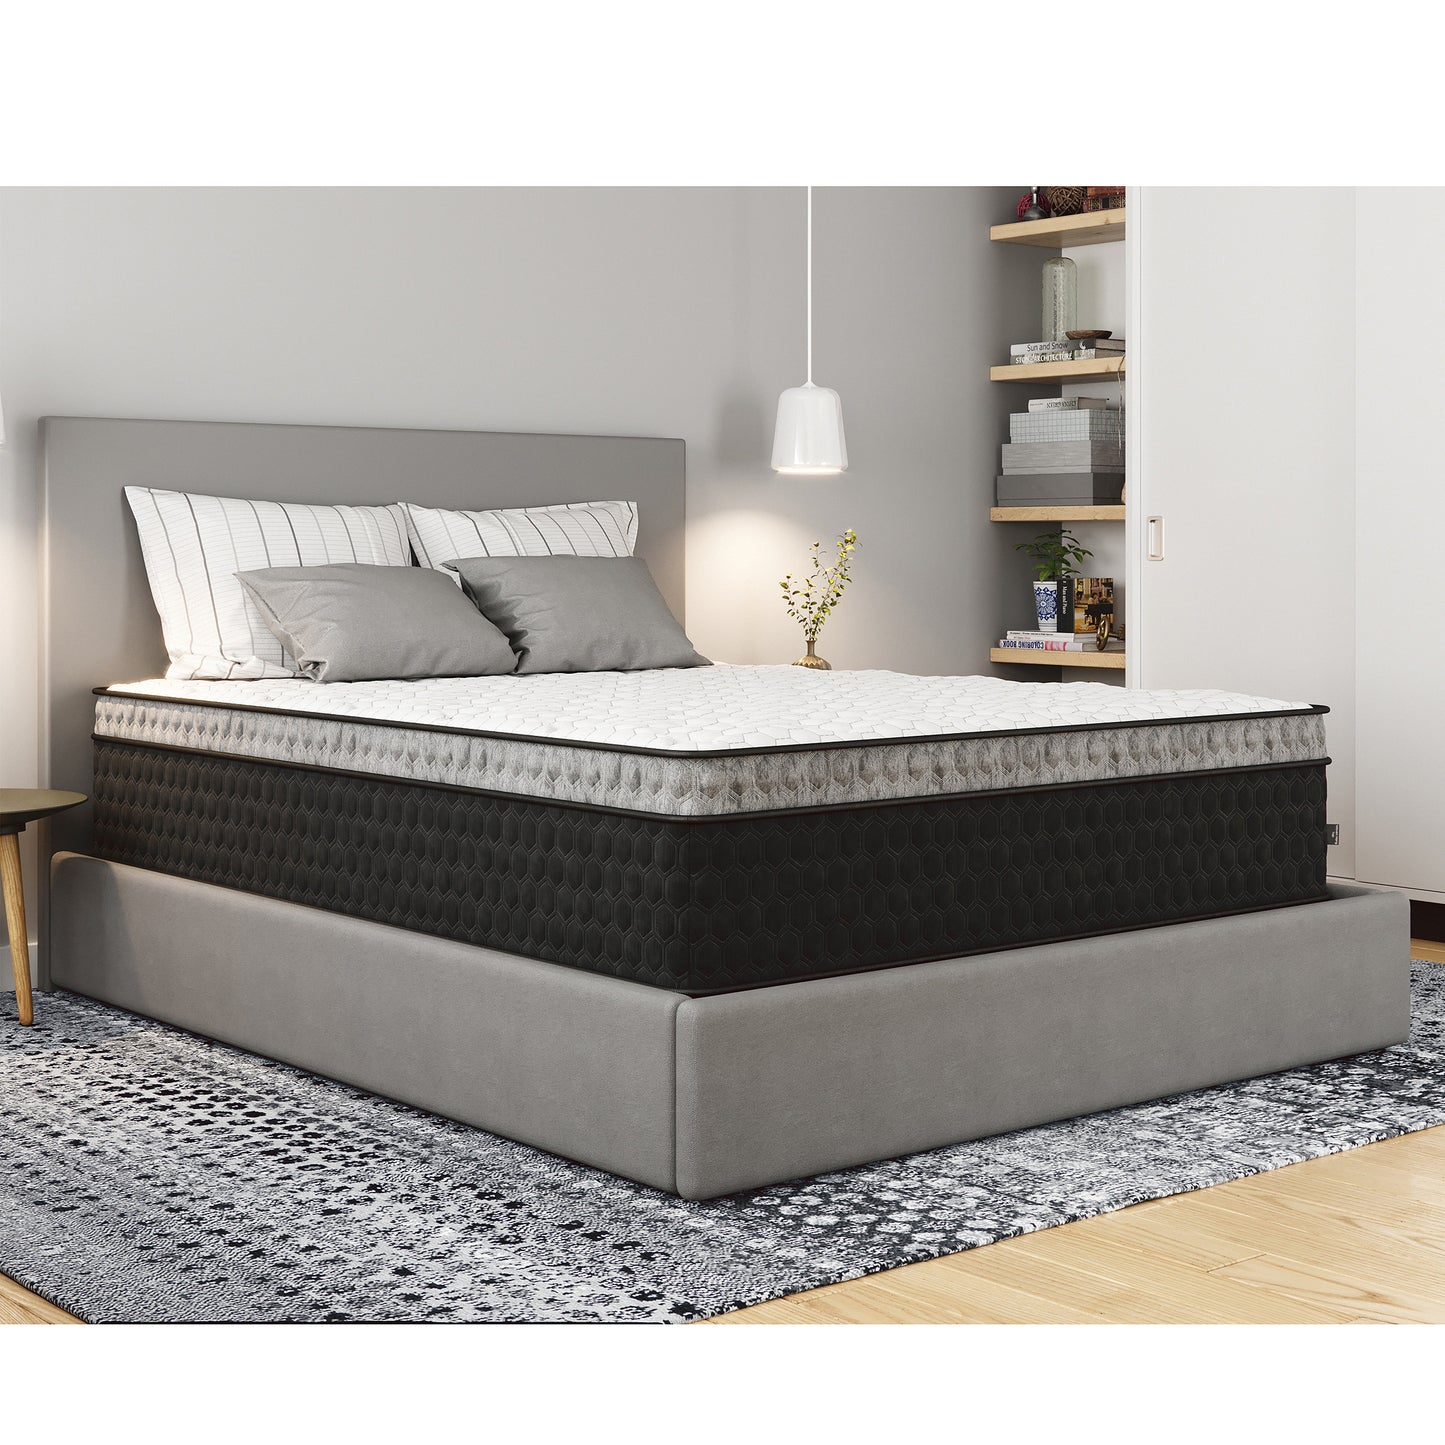 Luxor Copper Cool Hybrid 14" Firm Mattress (Compare to Layla™)